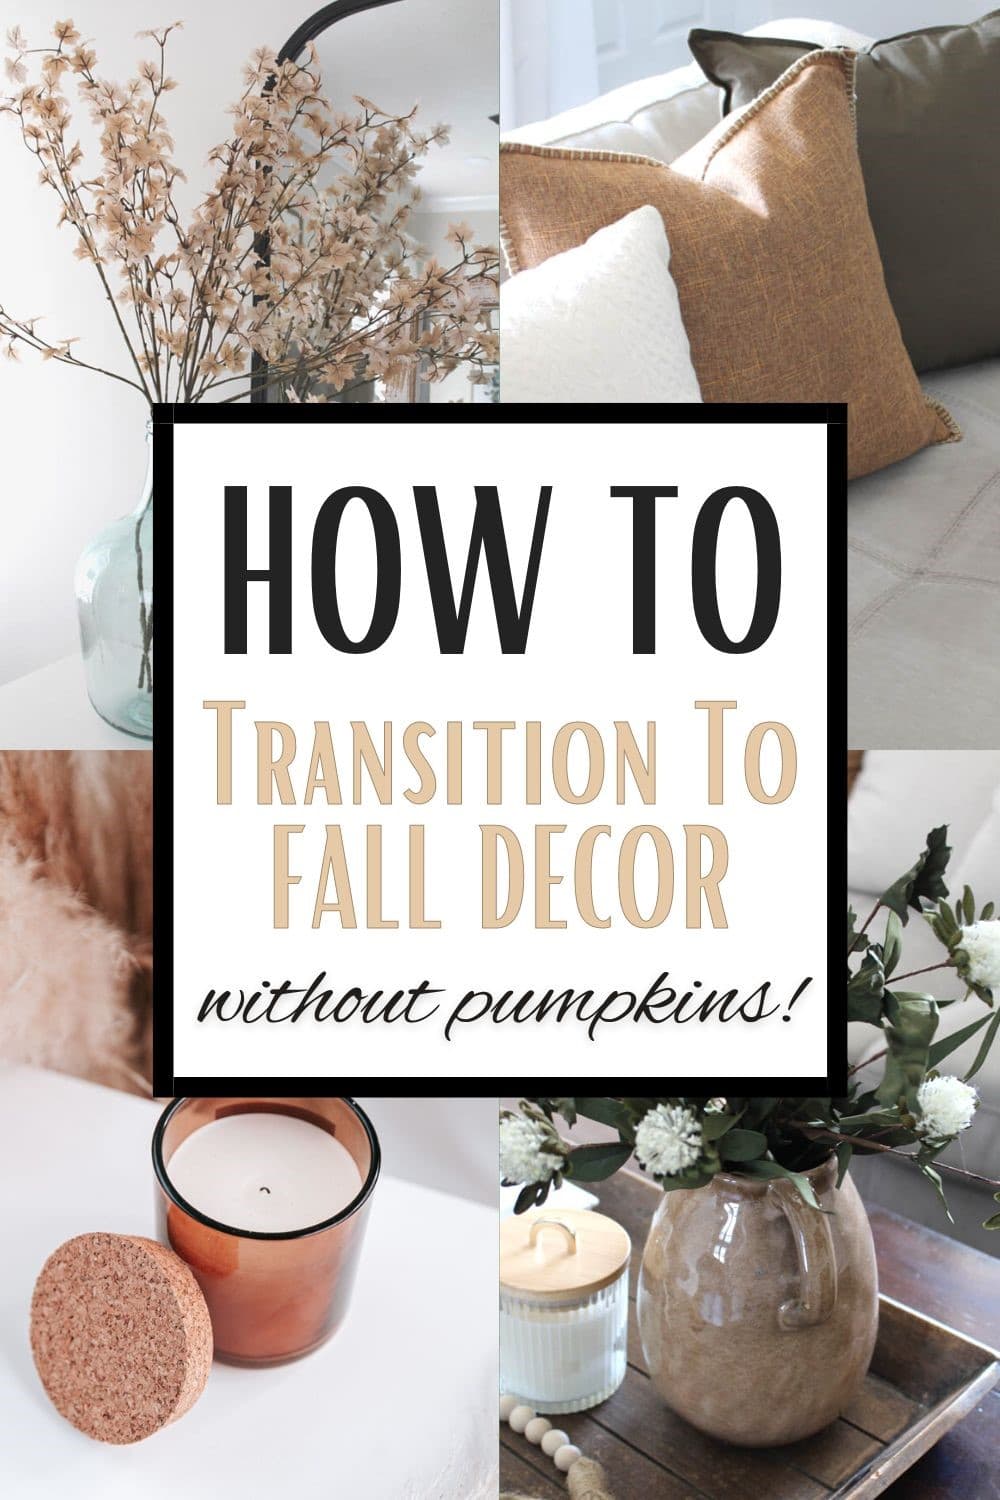 HOW TO TRANSITION TO FALL DECOR WITHOUT PUMPKINS